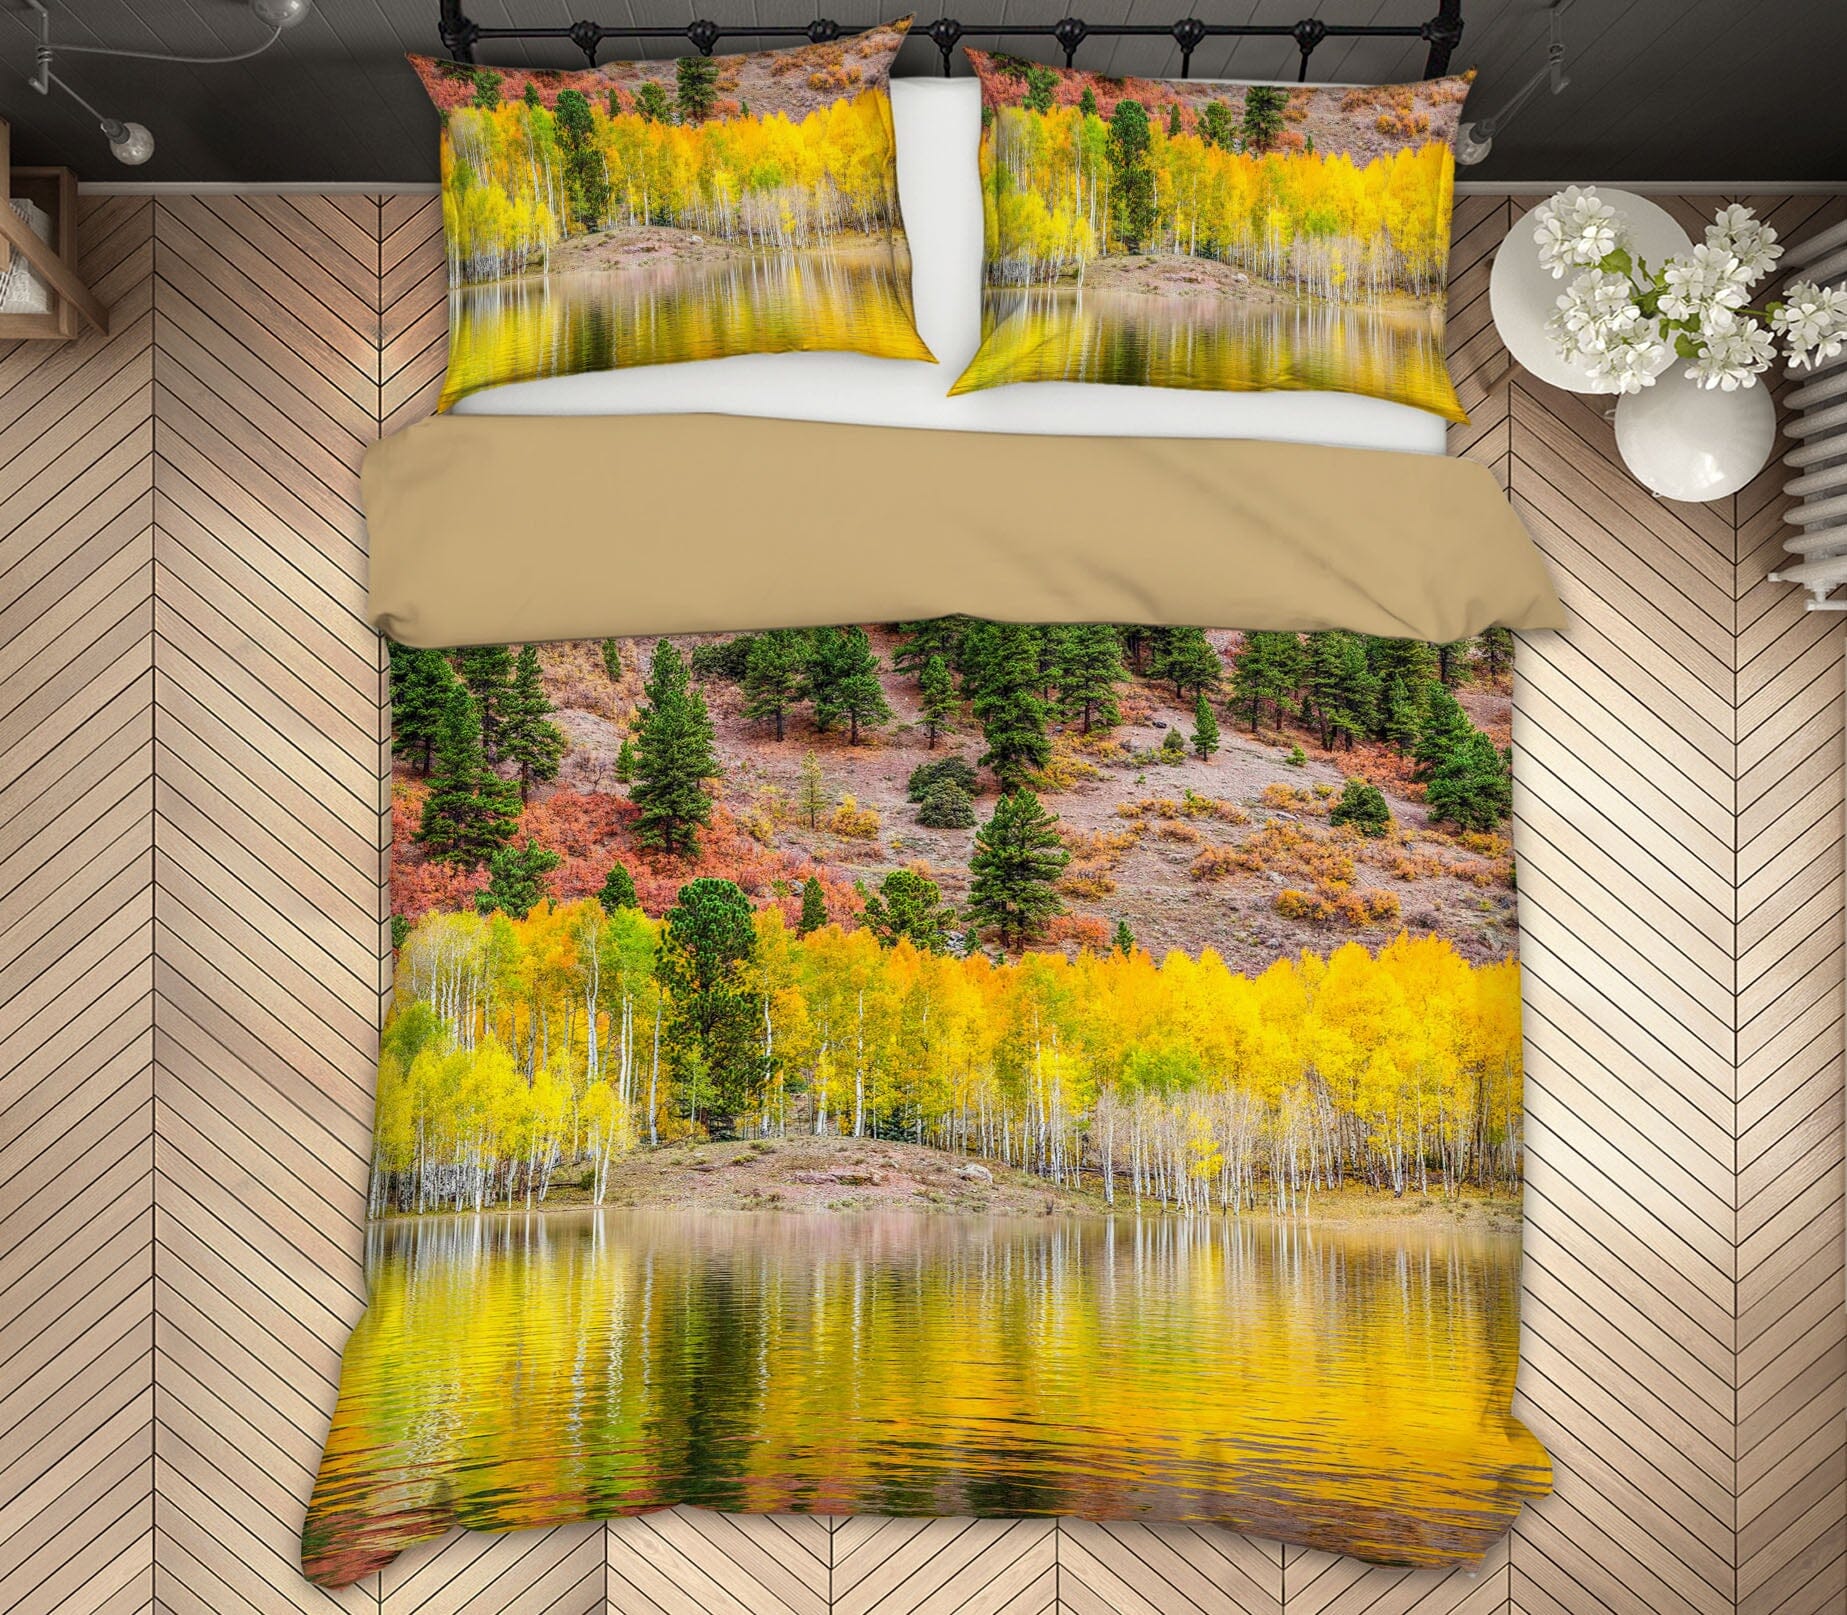 3D Yellow Forest 2018 Marco Carmassi Bedding Bed Pillowcases Quilt Quiet Covers AJ Creativity Home 